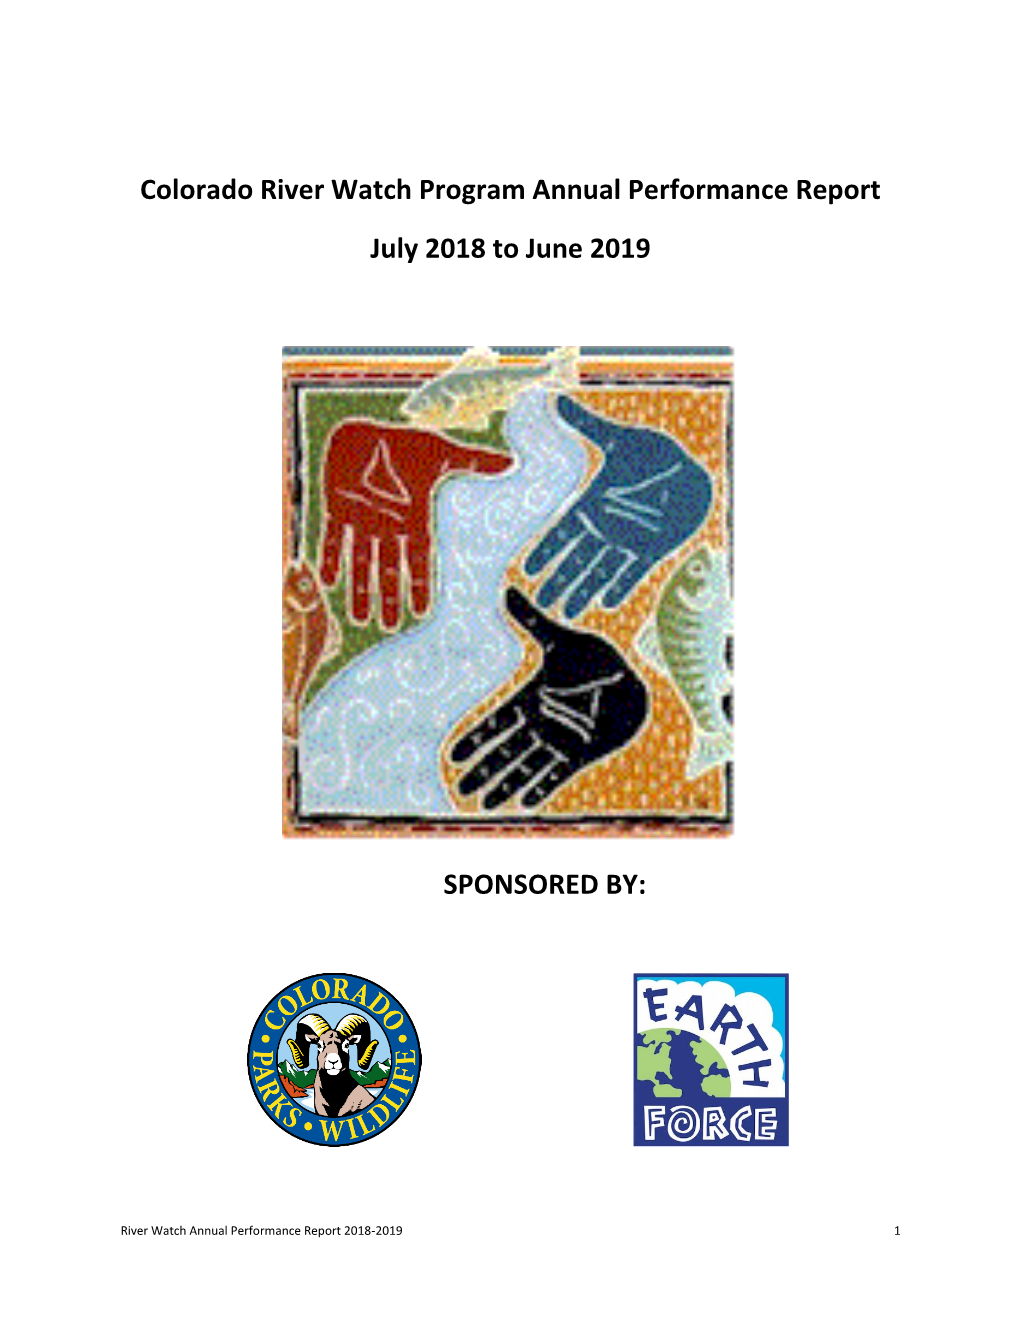 Colorado River Watch Program Annual Performance Report July 2018 to June 2019